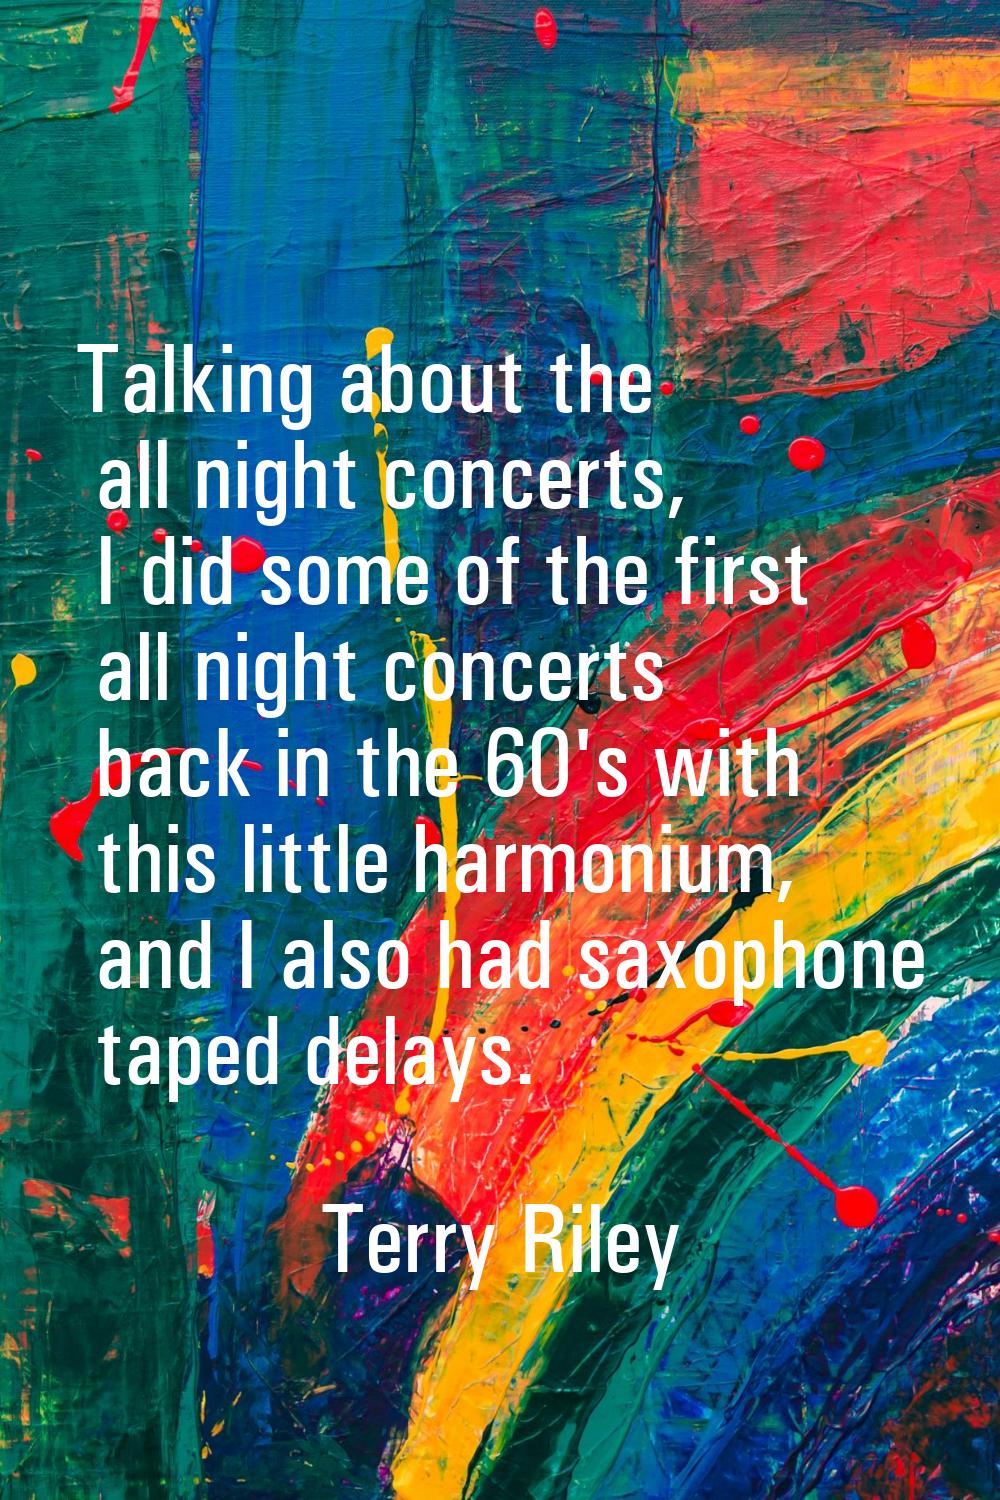 Talking about the all night concerts, I did some of the first all night concerts back in the 60's w